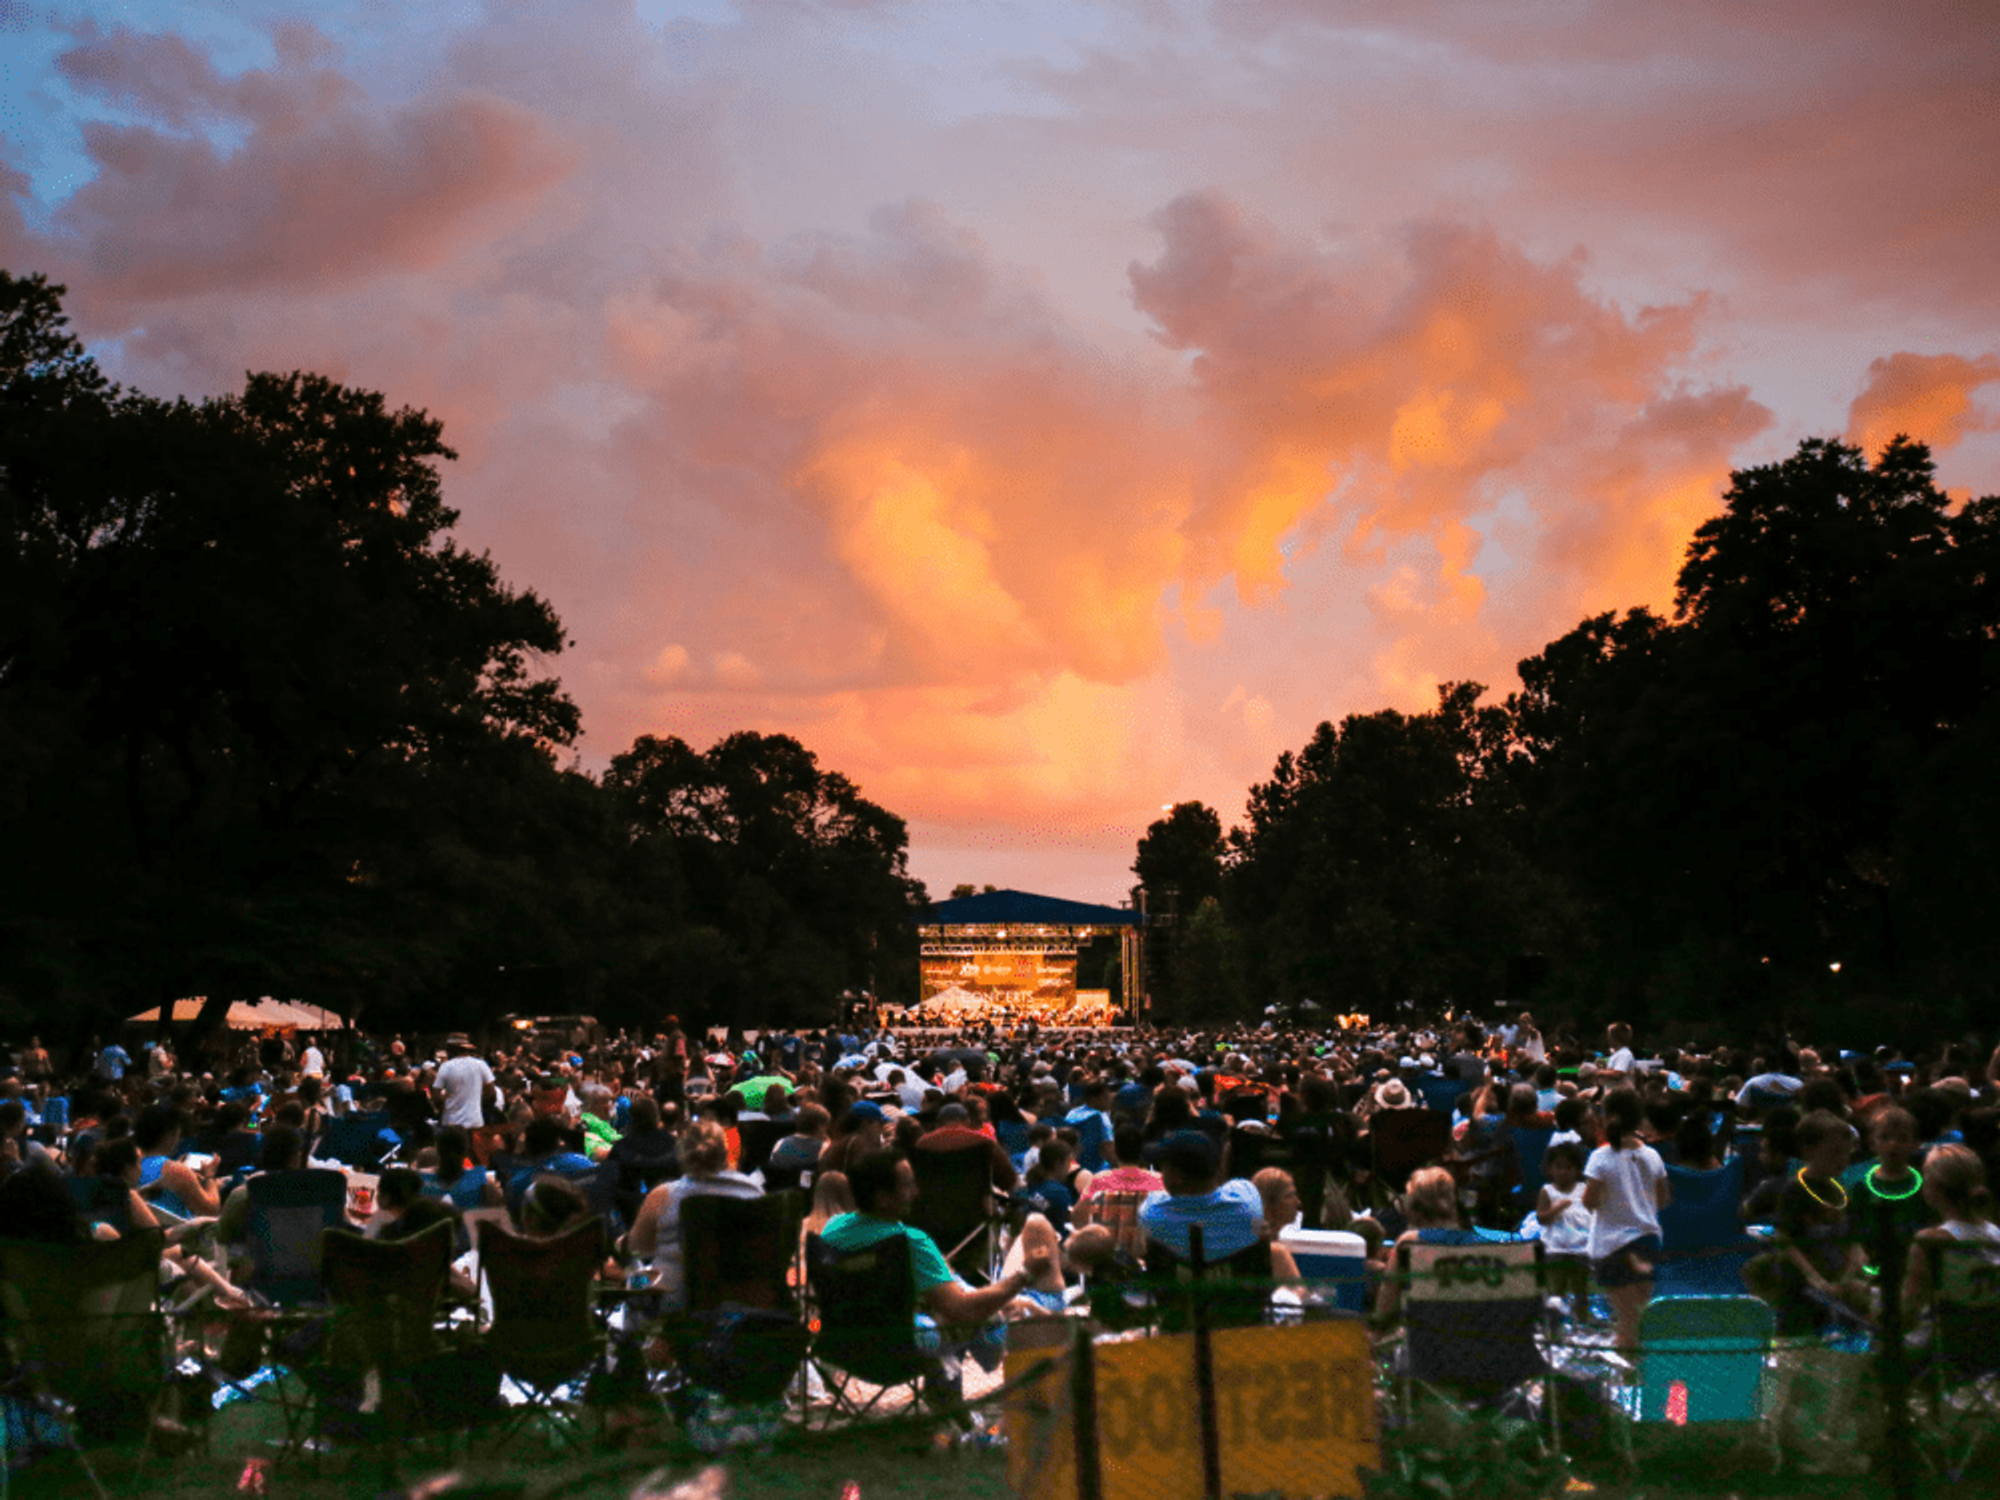 The Fort Worth Symphony Orchestra's Concerts in the Garden series at Fort Worth Botanic Garden plays the music of Pink Floyd, Journey, and Broadway, June 10-12.